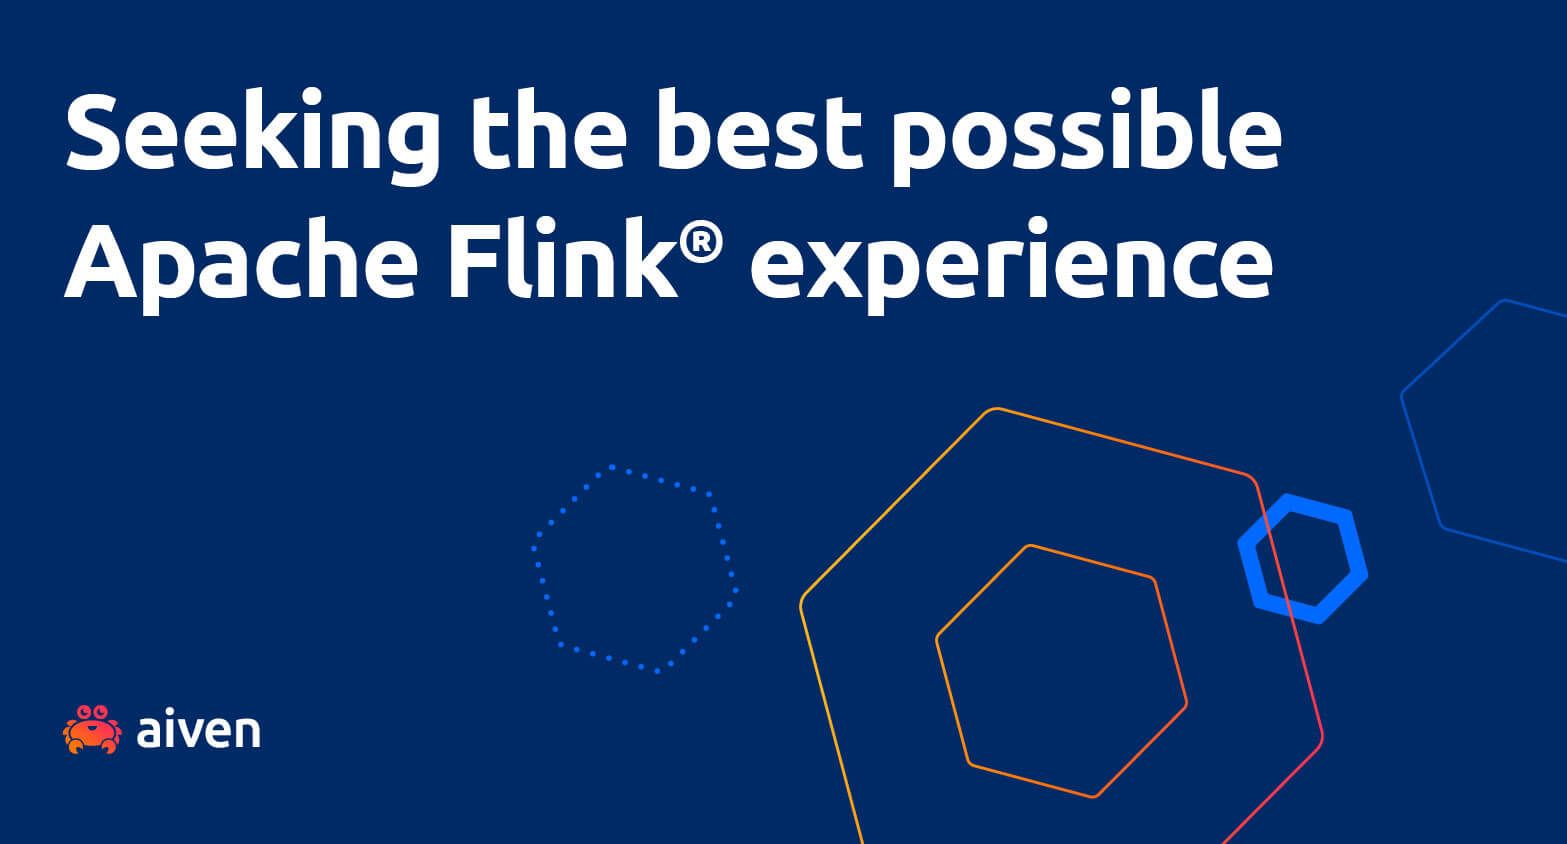 The text "Seeking the best possible Apache Flink® experience" on a blue background, with the Aiven cuddly crab logo at the bottom right